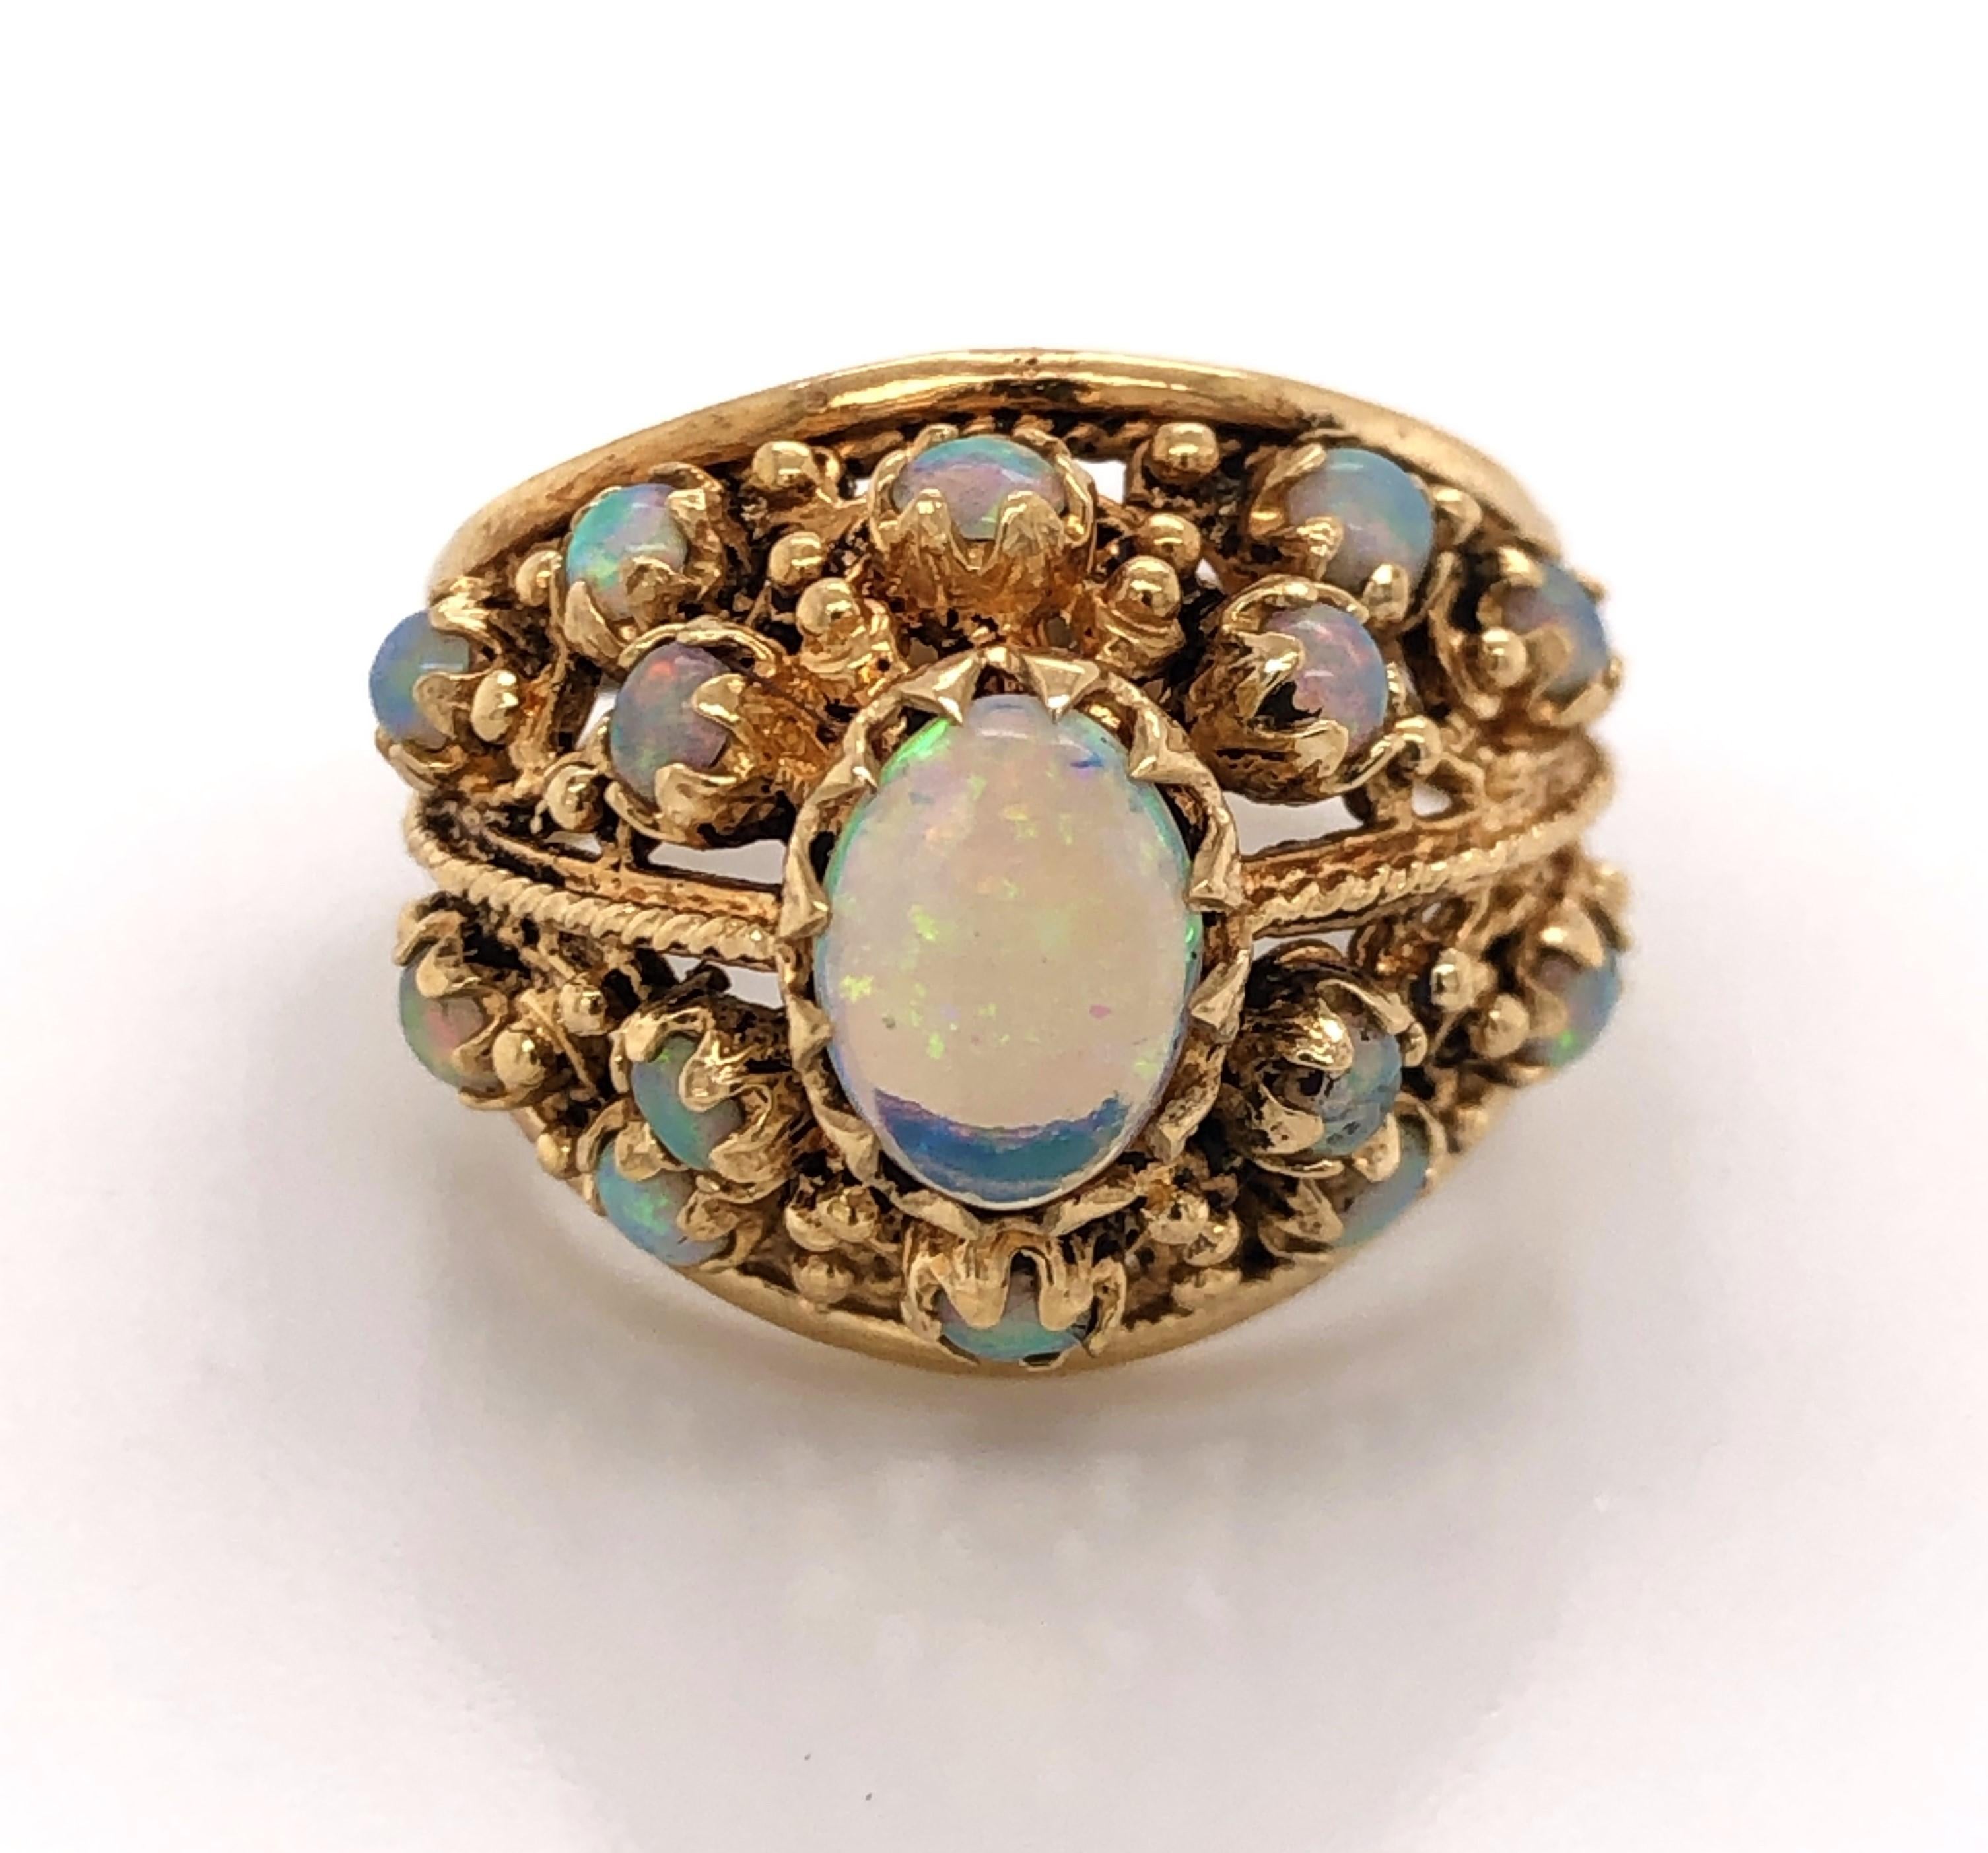 An effervescent pastel rainbow is displayed by this spectacular opal dome ring in fourteen karat (14k) yellow gold. Circa 1960's, the center stone is one 1/2 carat. Surrounding are fourteen opal accent stones, all individually prong set in fancy